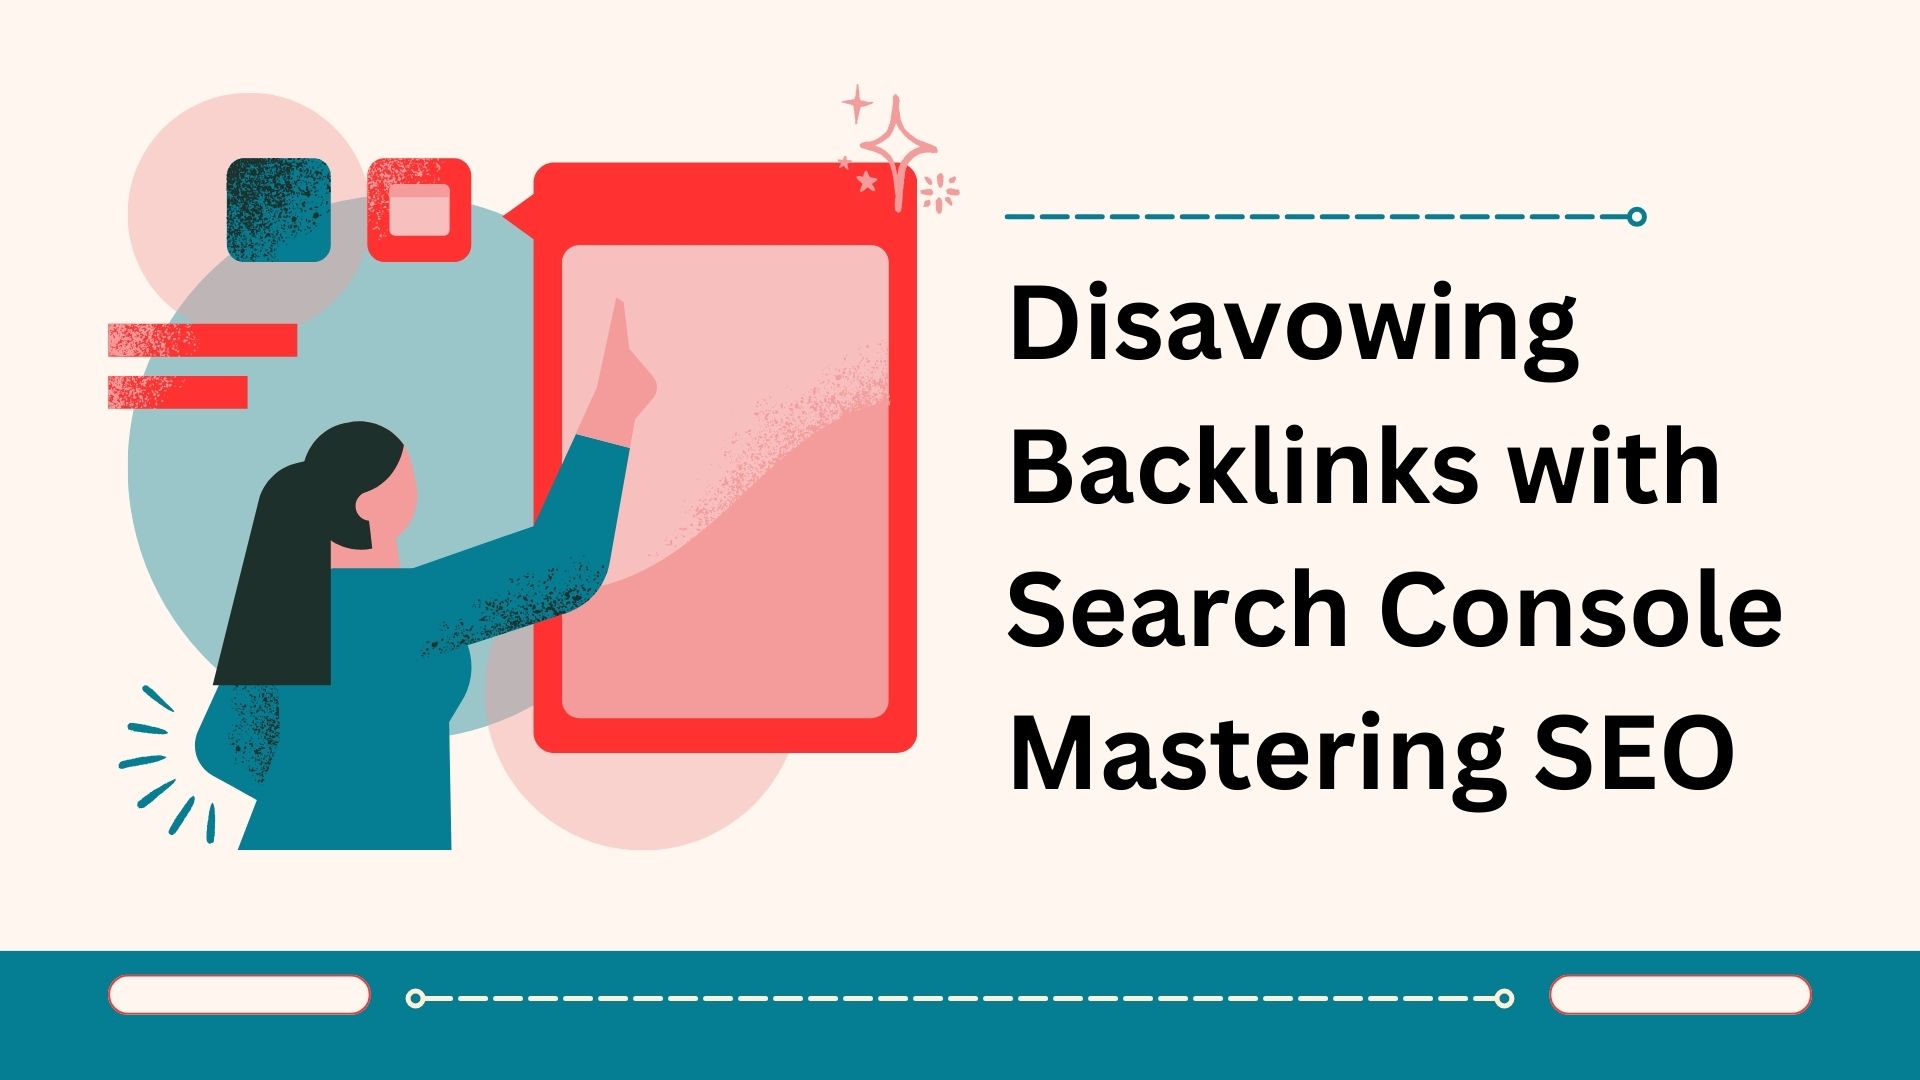 Disavowing Backlinks with Search Console - Mastering SEO